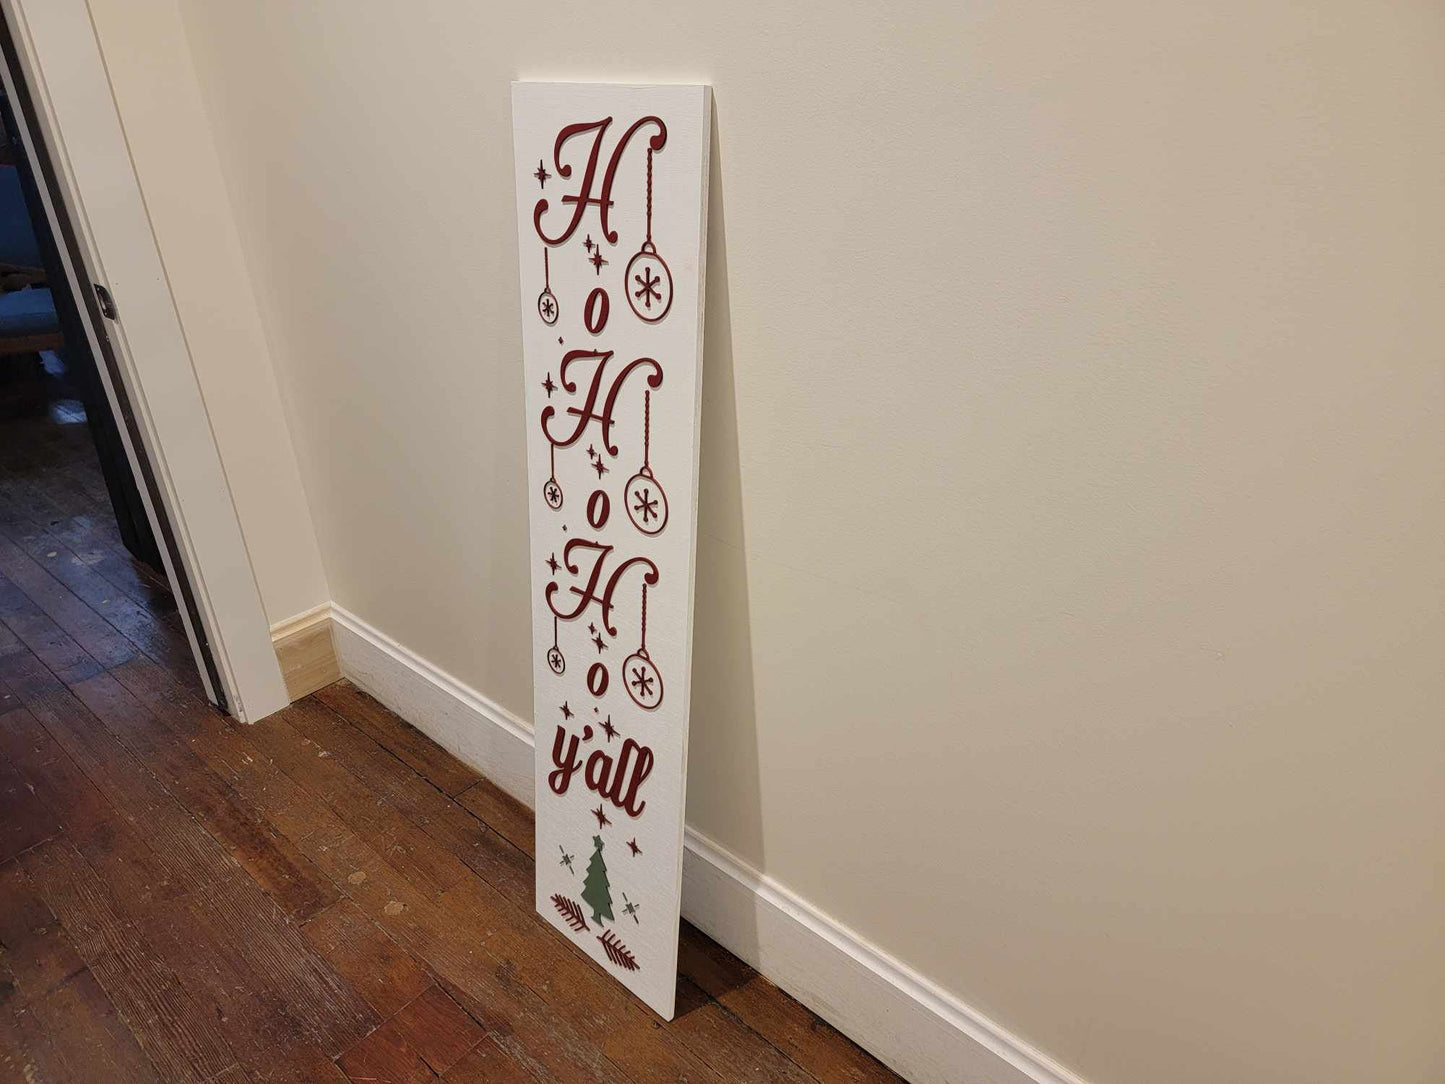 Merry Christmas Yall Ho Ho Ho Farmhouse Porch Leaner Step Door Sign 3D Handmade Winter Unframed Red and Green Country Southern